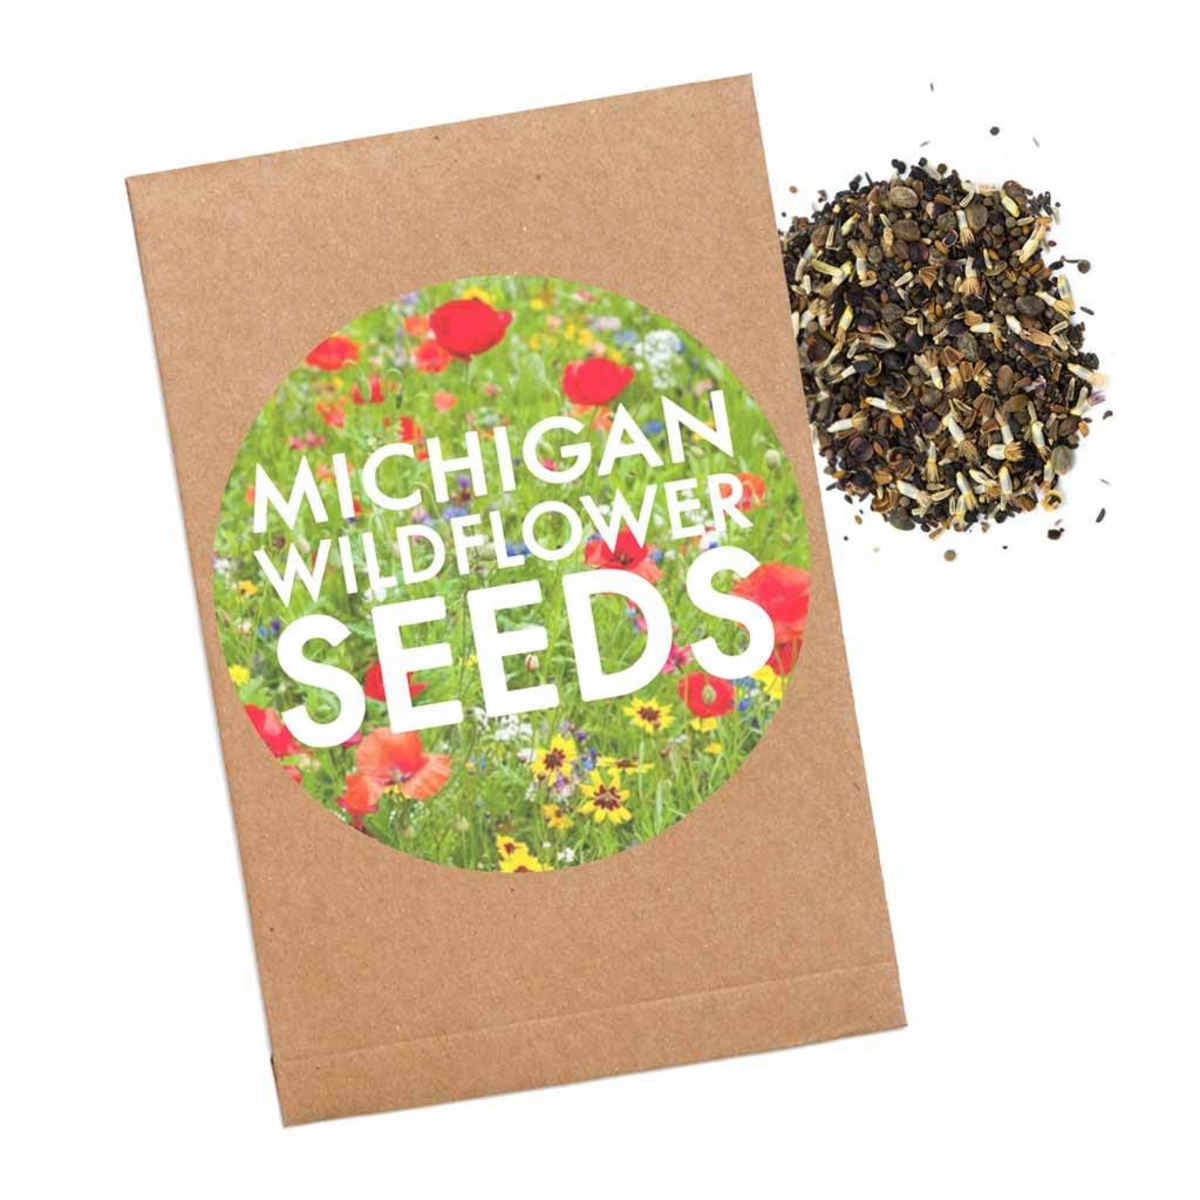 How Many Seeds Are In A Normal Pack Of Wildflower Seed Mix